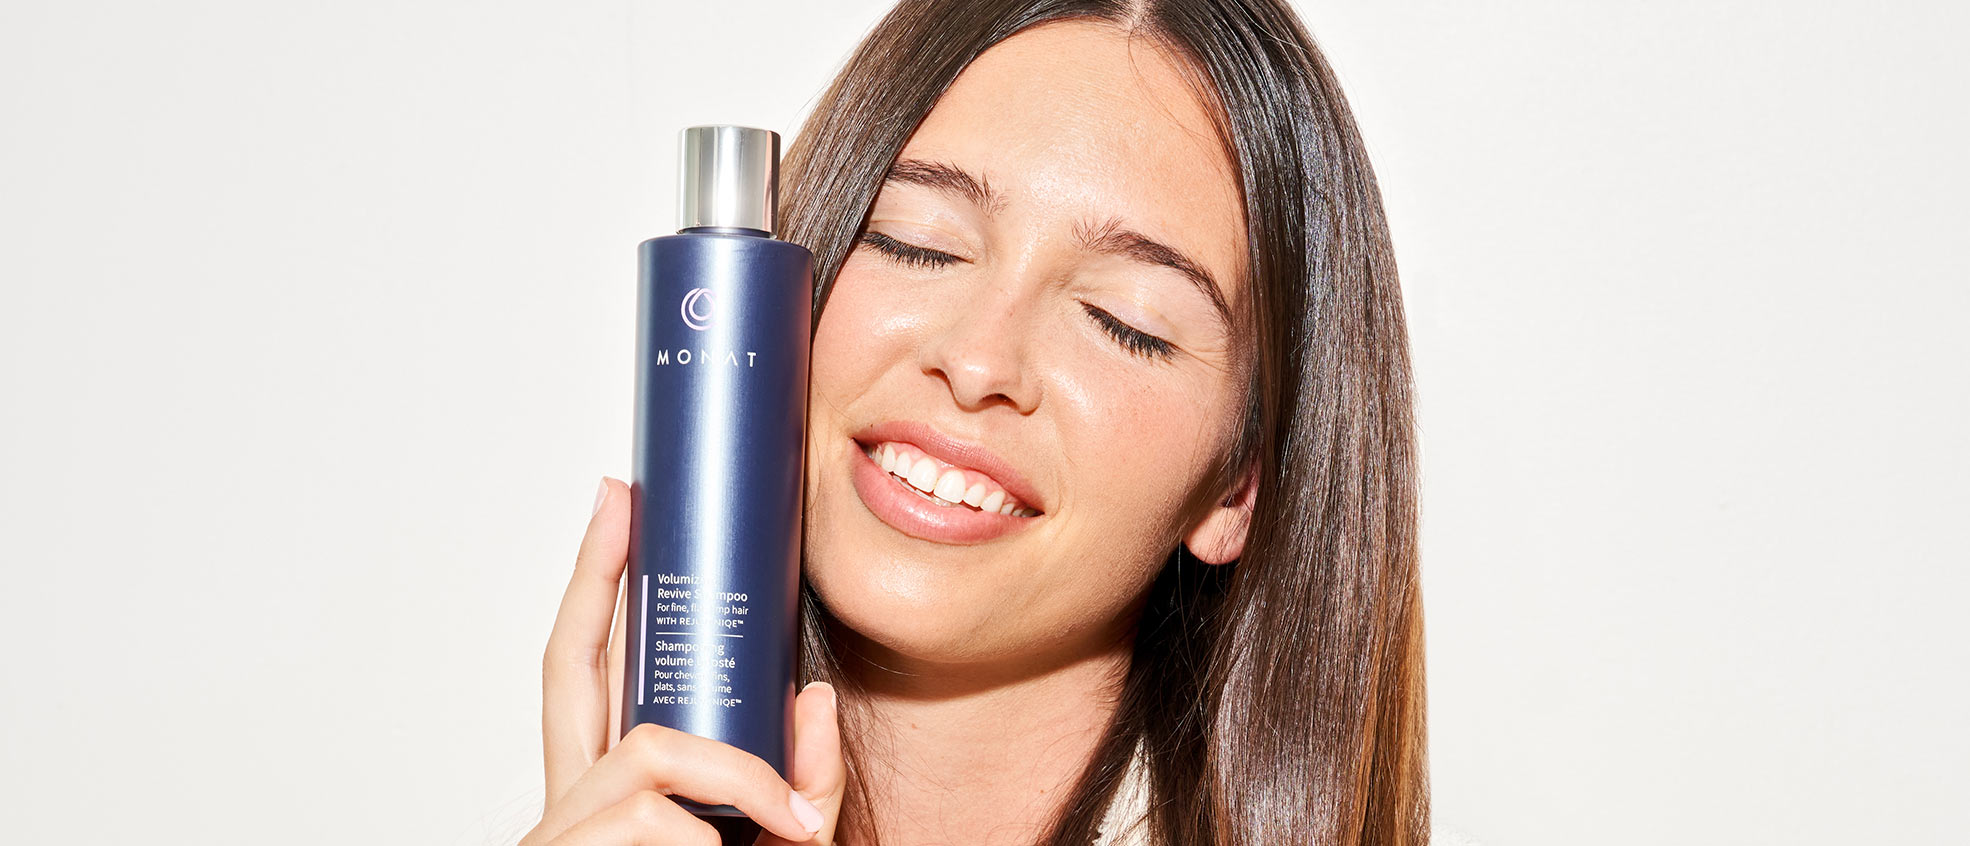 Brunette female smiling and holding the Volumizing Revive Shampoo against her face.